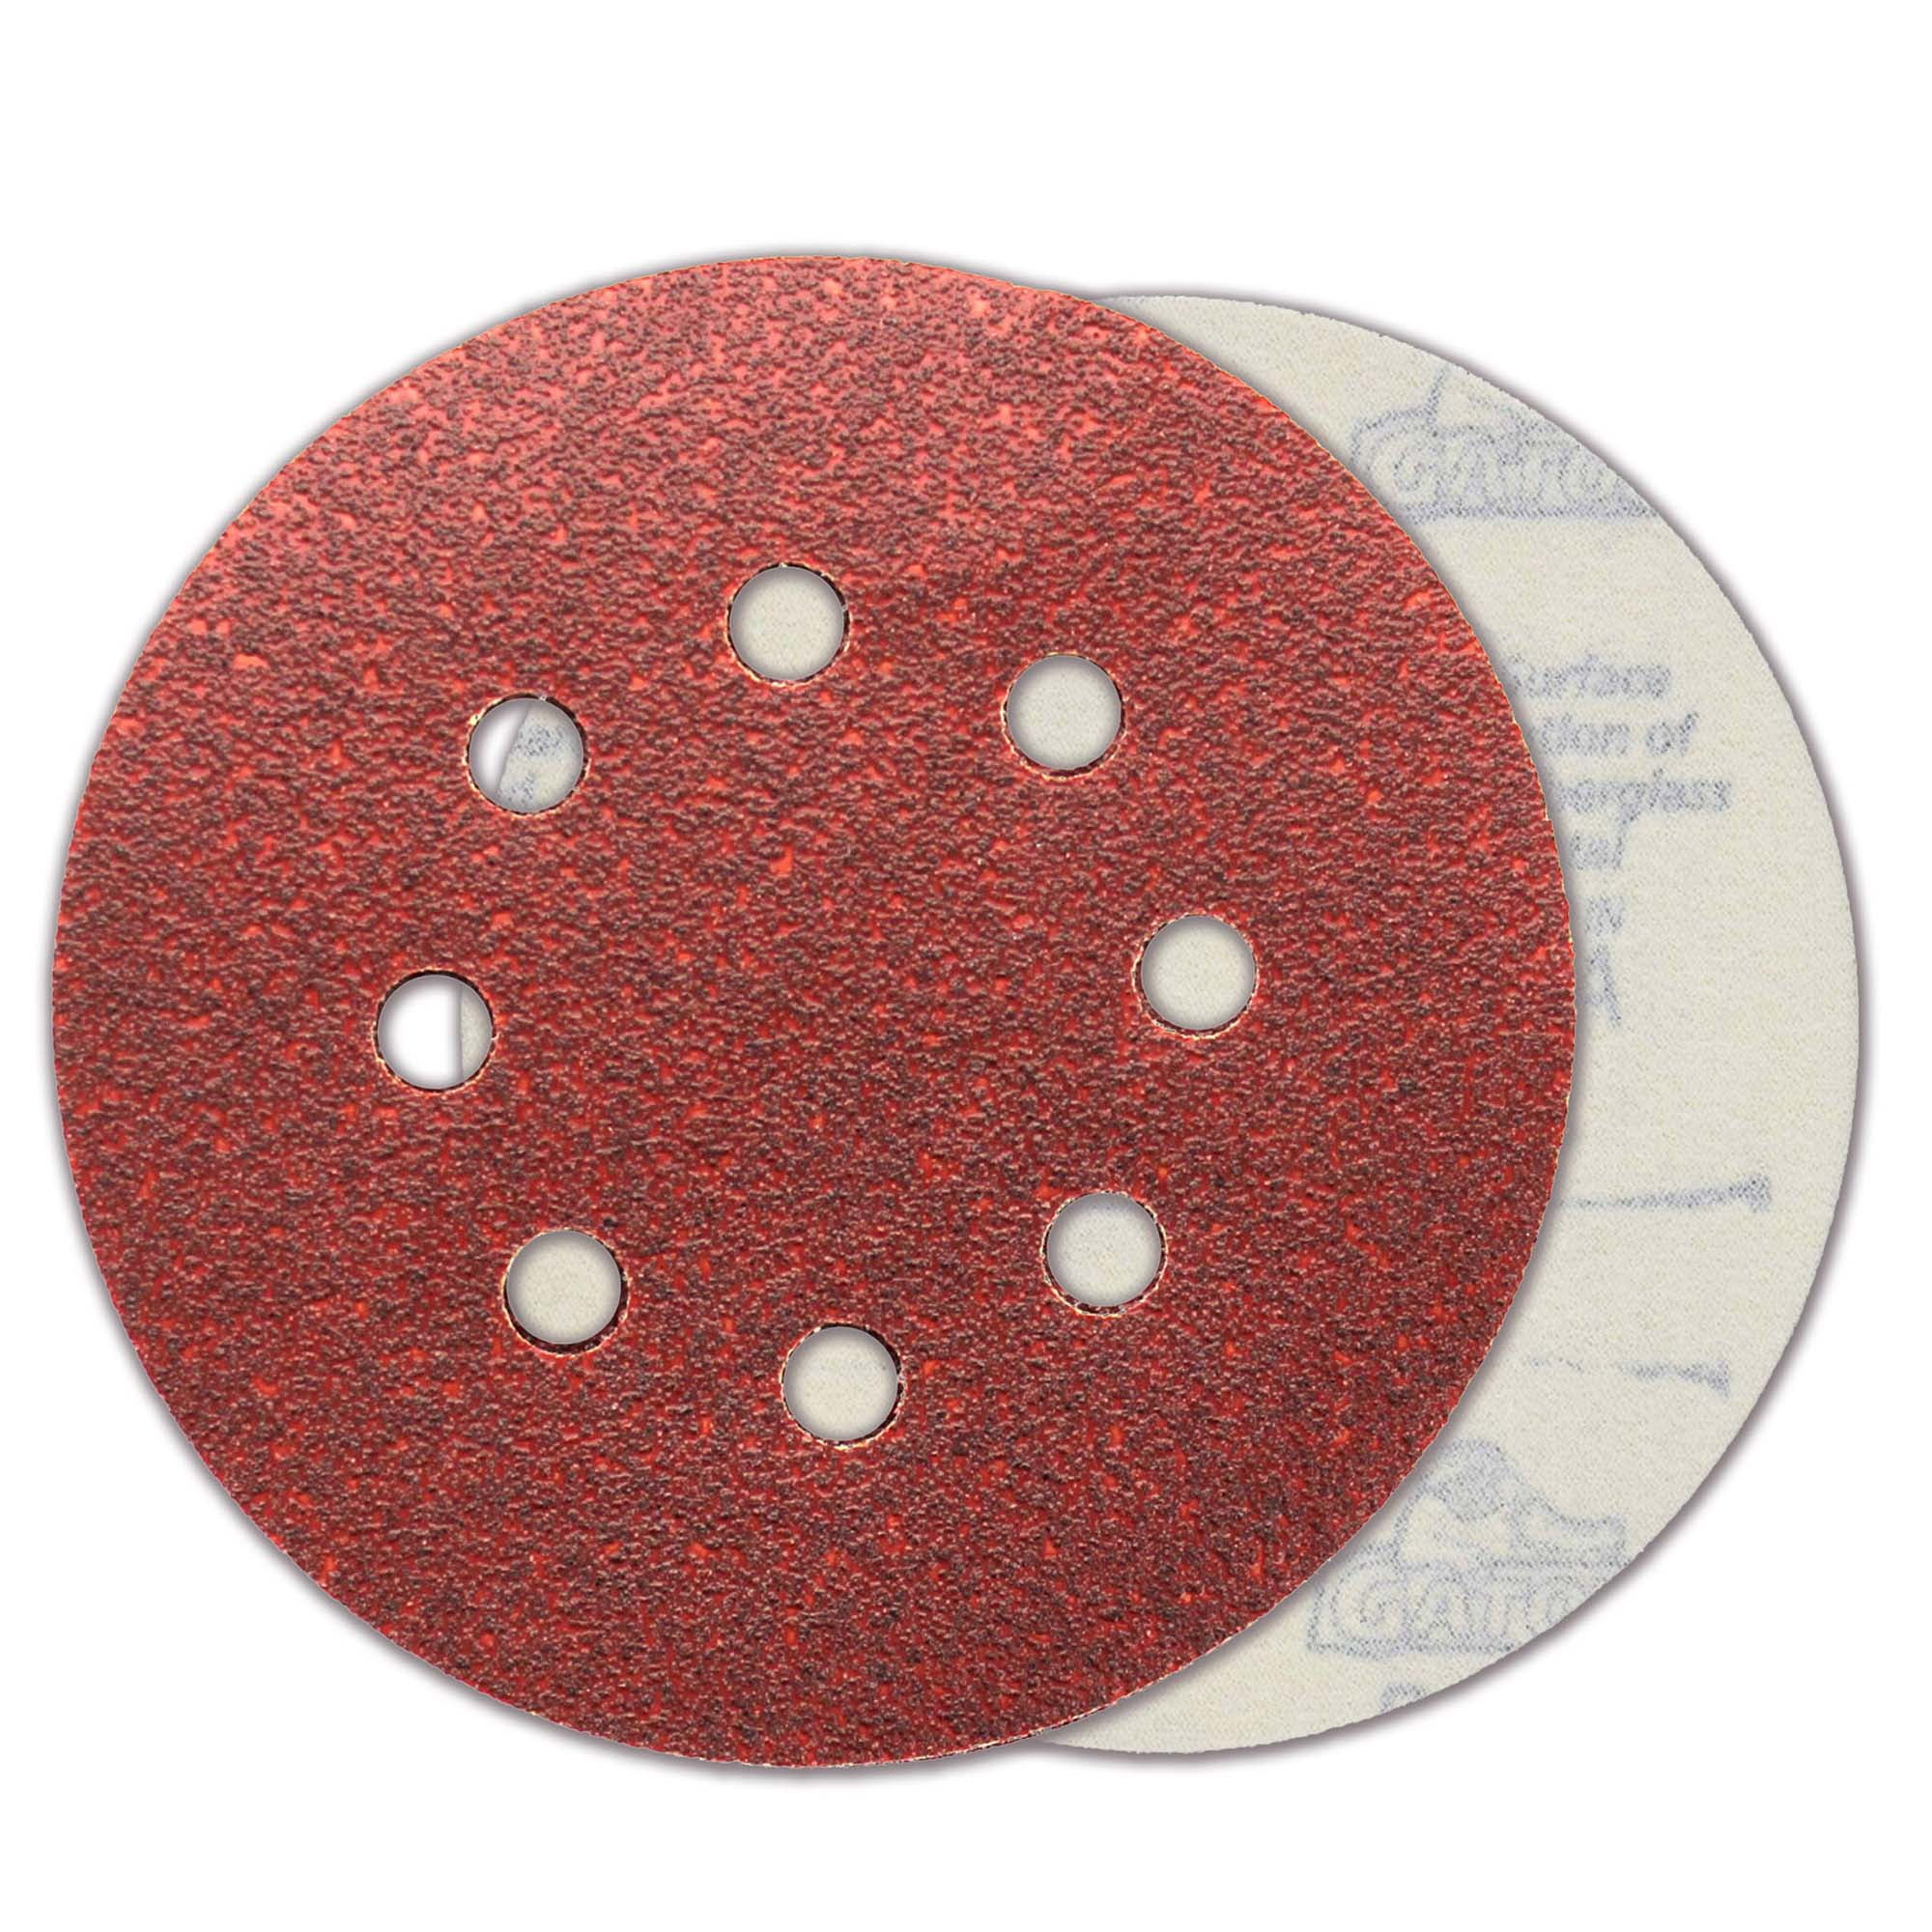 Details about    55 7"   6-hole Sanding Discs  w/5 different Grits 40 60 80 120 240 